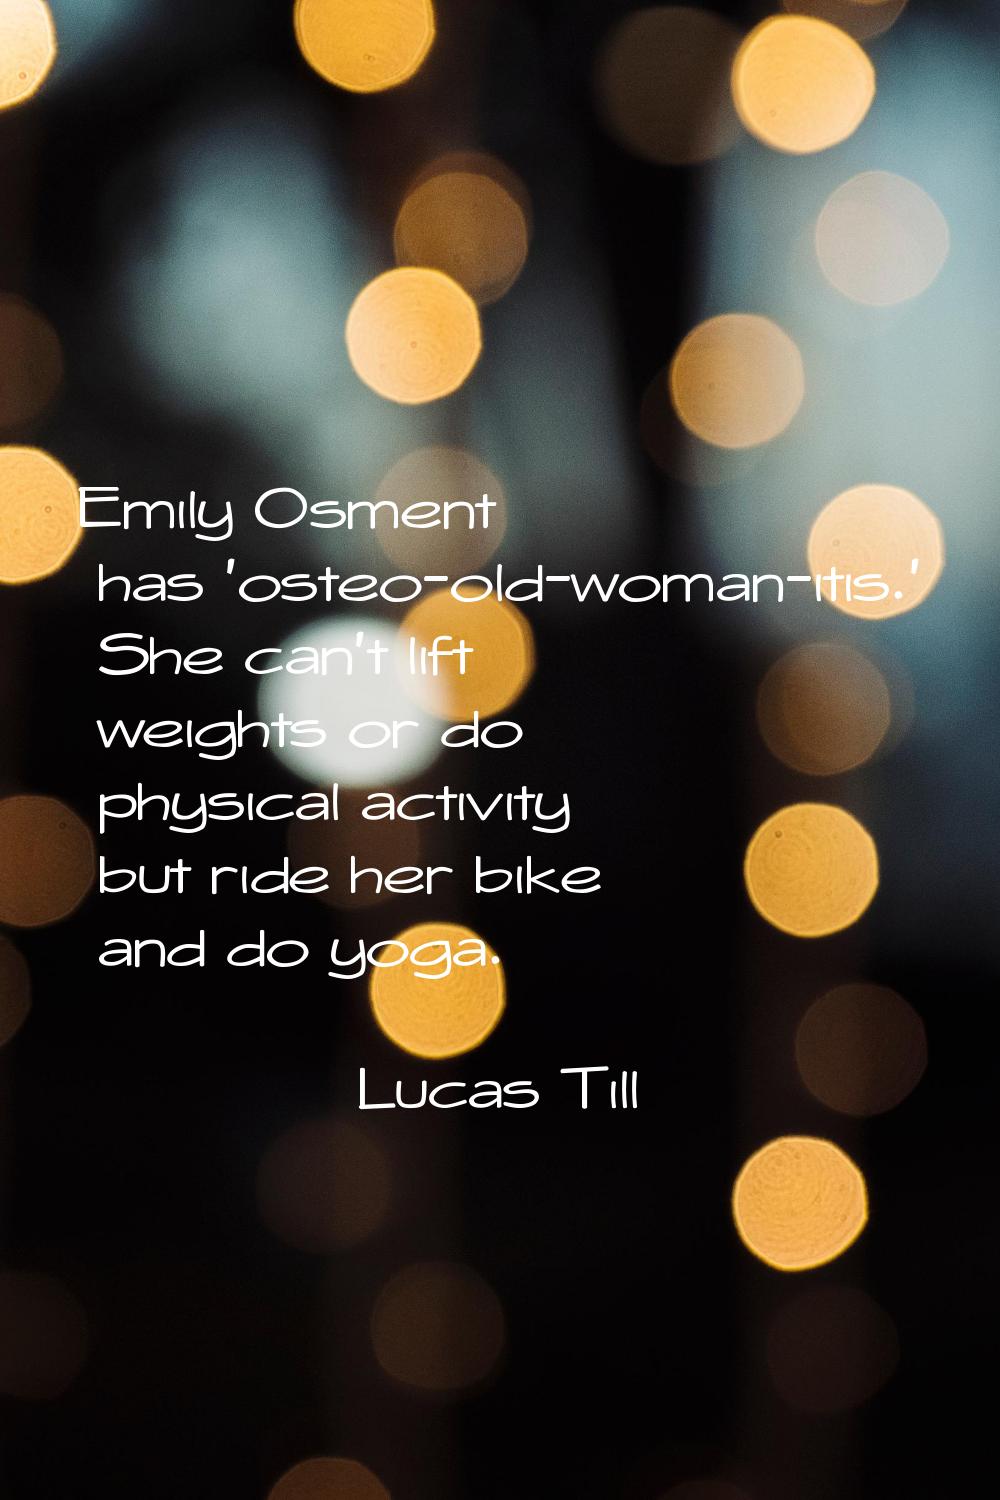 Emily Osment has 'osteo-old-woman-itis.' She can't lift weights or do physical activity but ride he